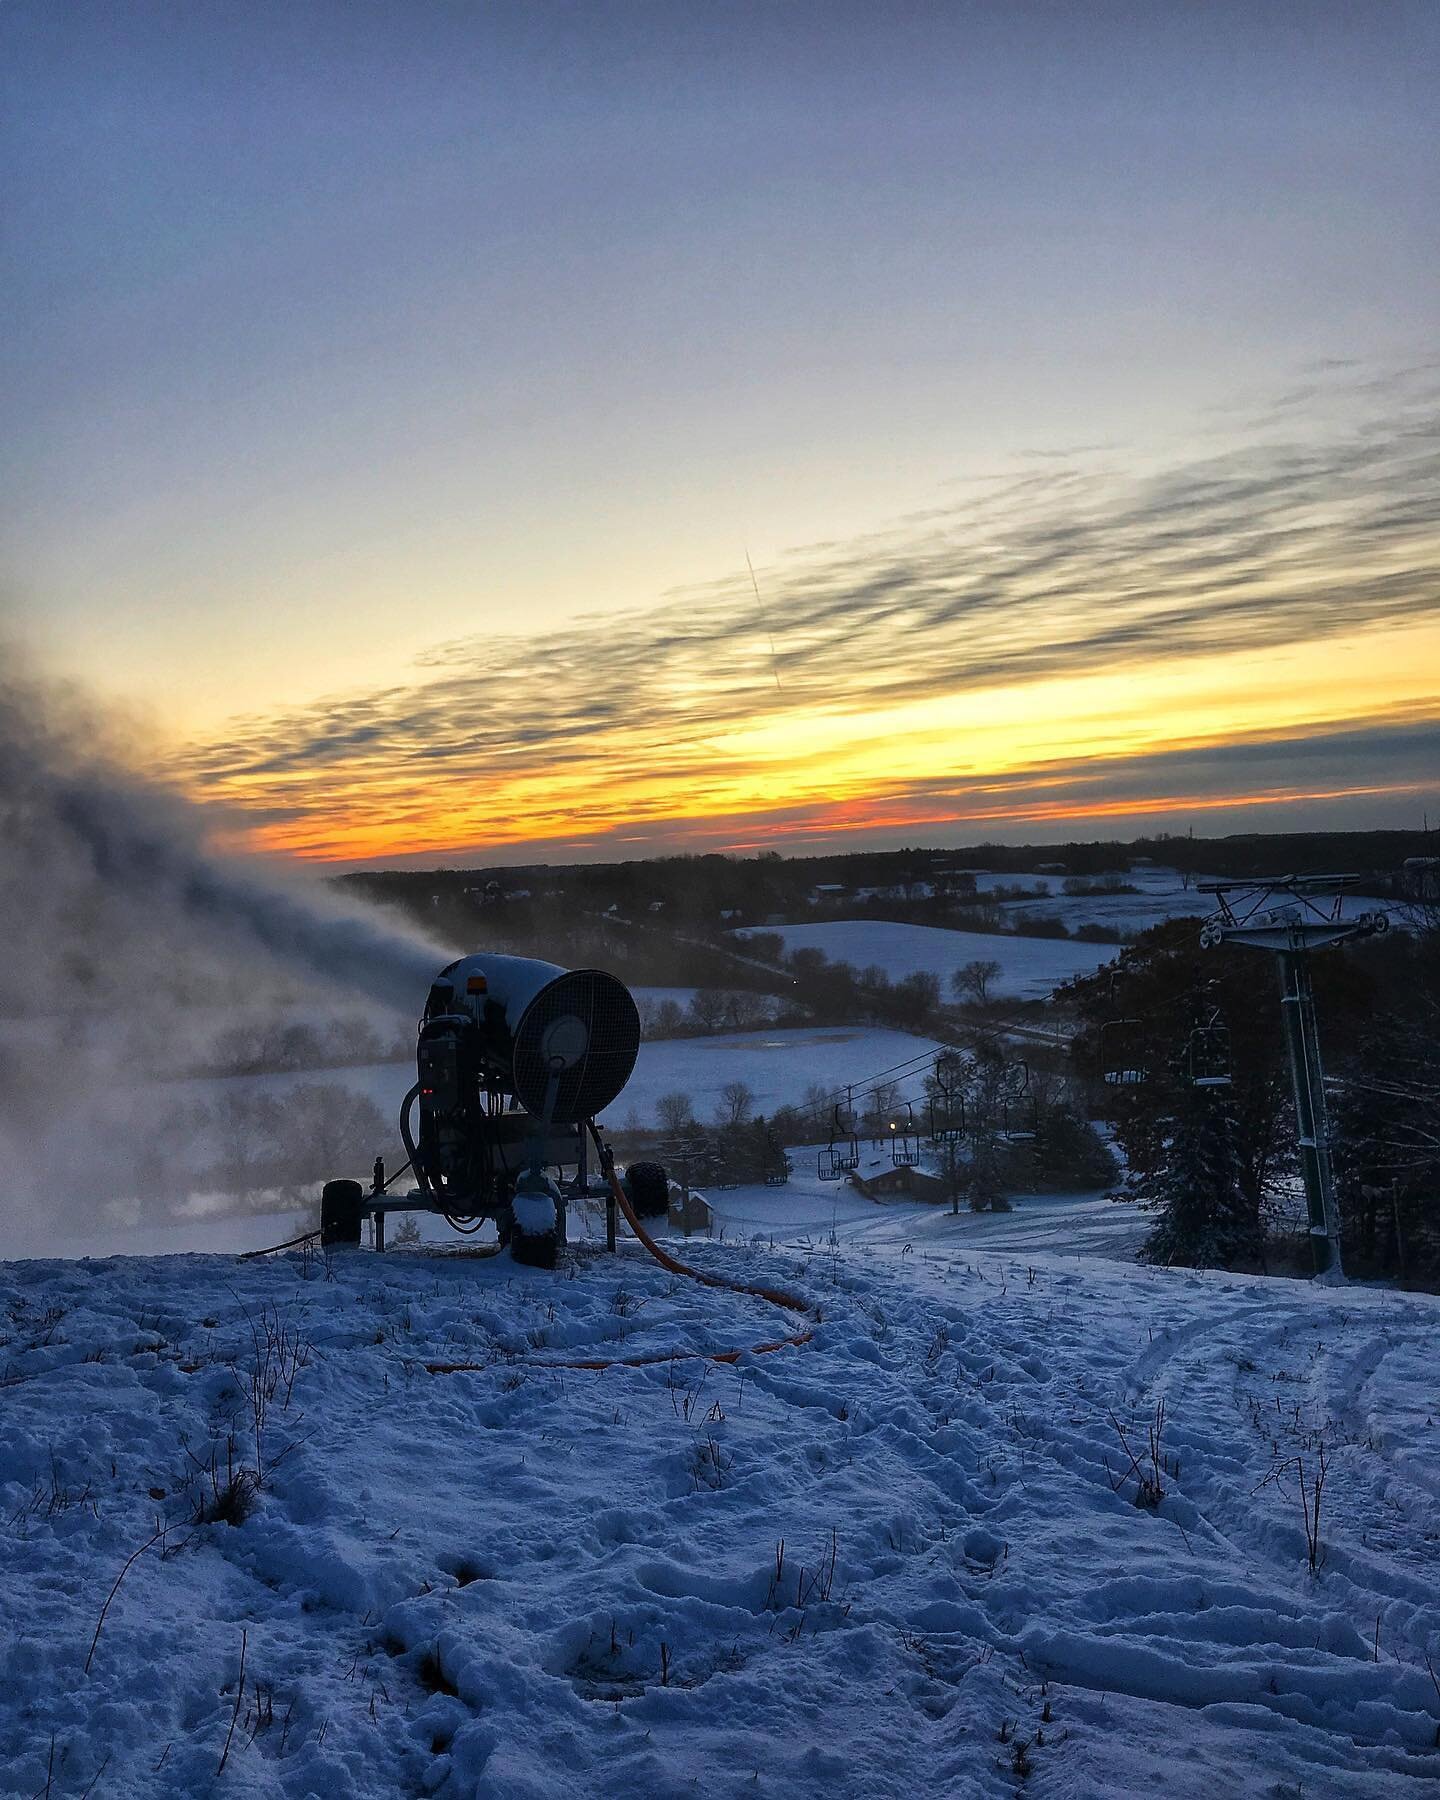 Guess what&hellip;.???
 ⠀⠀⠀⠀⠀⠀
It&rsquo;s time to kiss these warm, summer-like ☀️ days goodbye! With (much) colder temperatures in the immediate forecast, our Snowmaking Team has plans to start blowing snow THIS WEEKEND 🎉❄️✨!
 ⠀⠀⠀⠀⠀⠀
Cross your fing